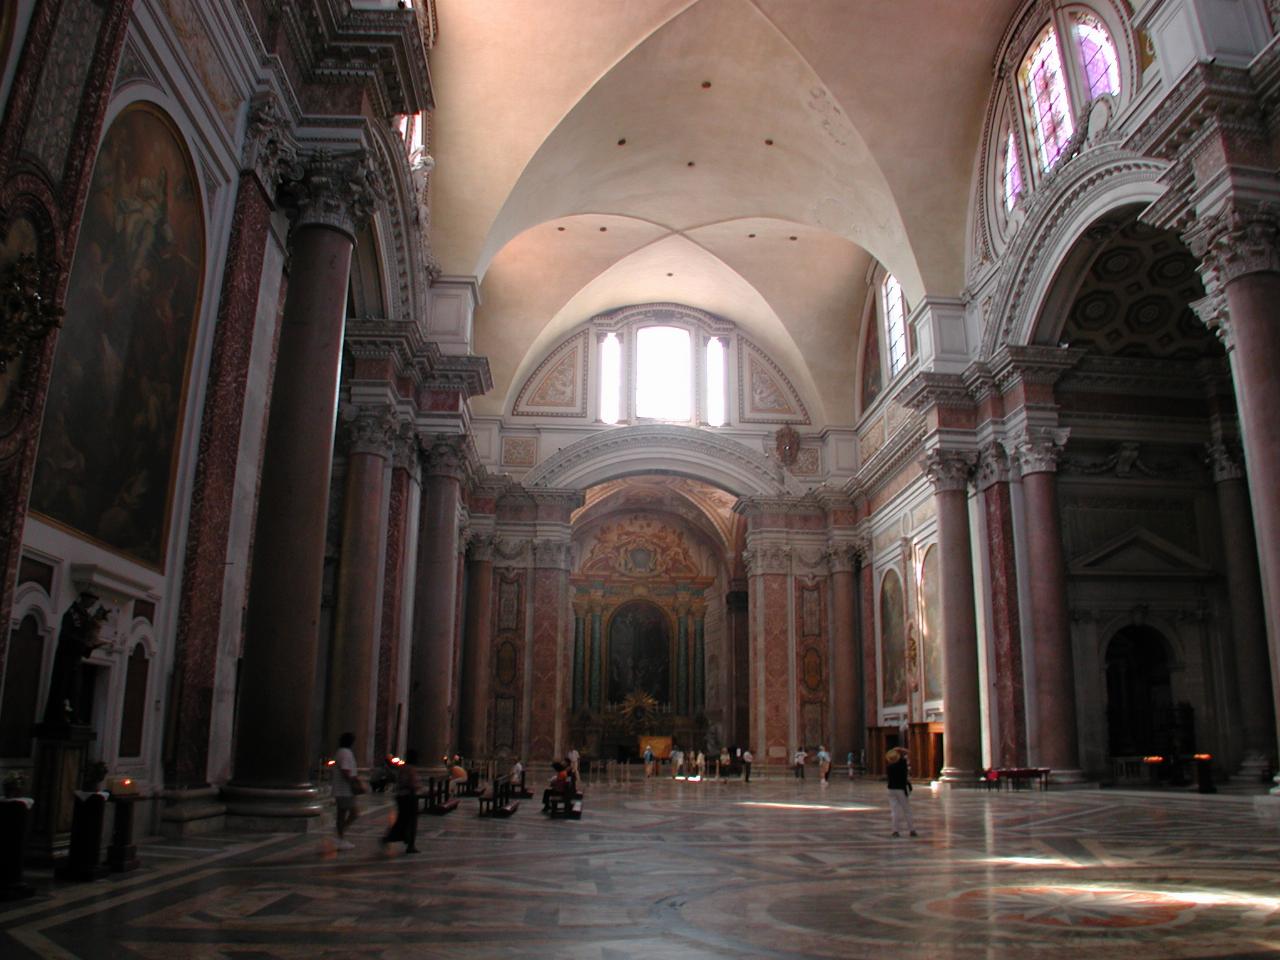 Roof and size of the Basilica of S. Maria Degli Angeli